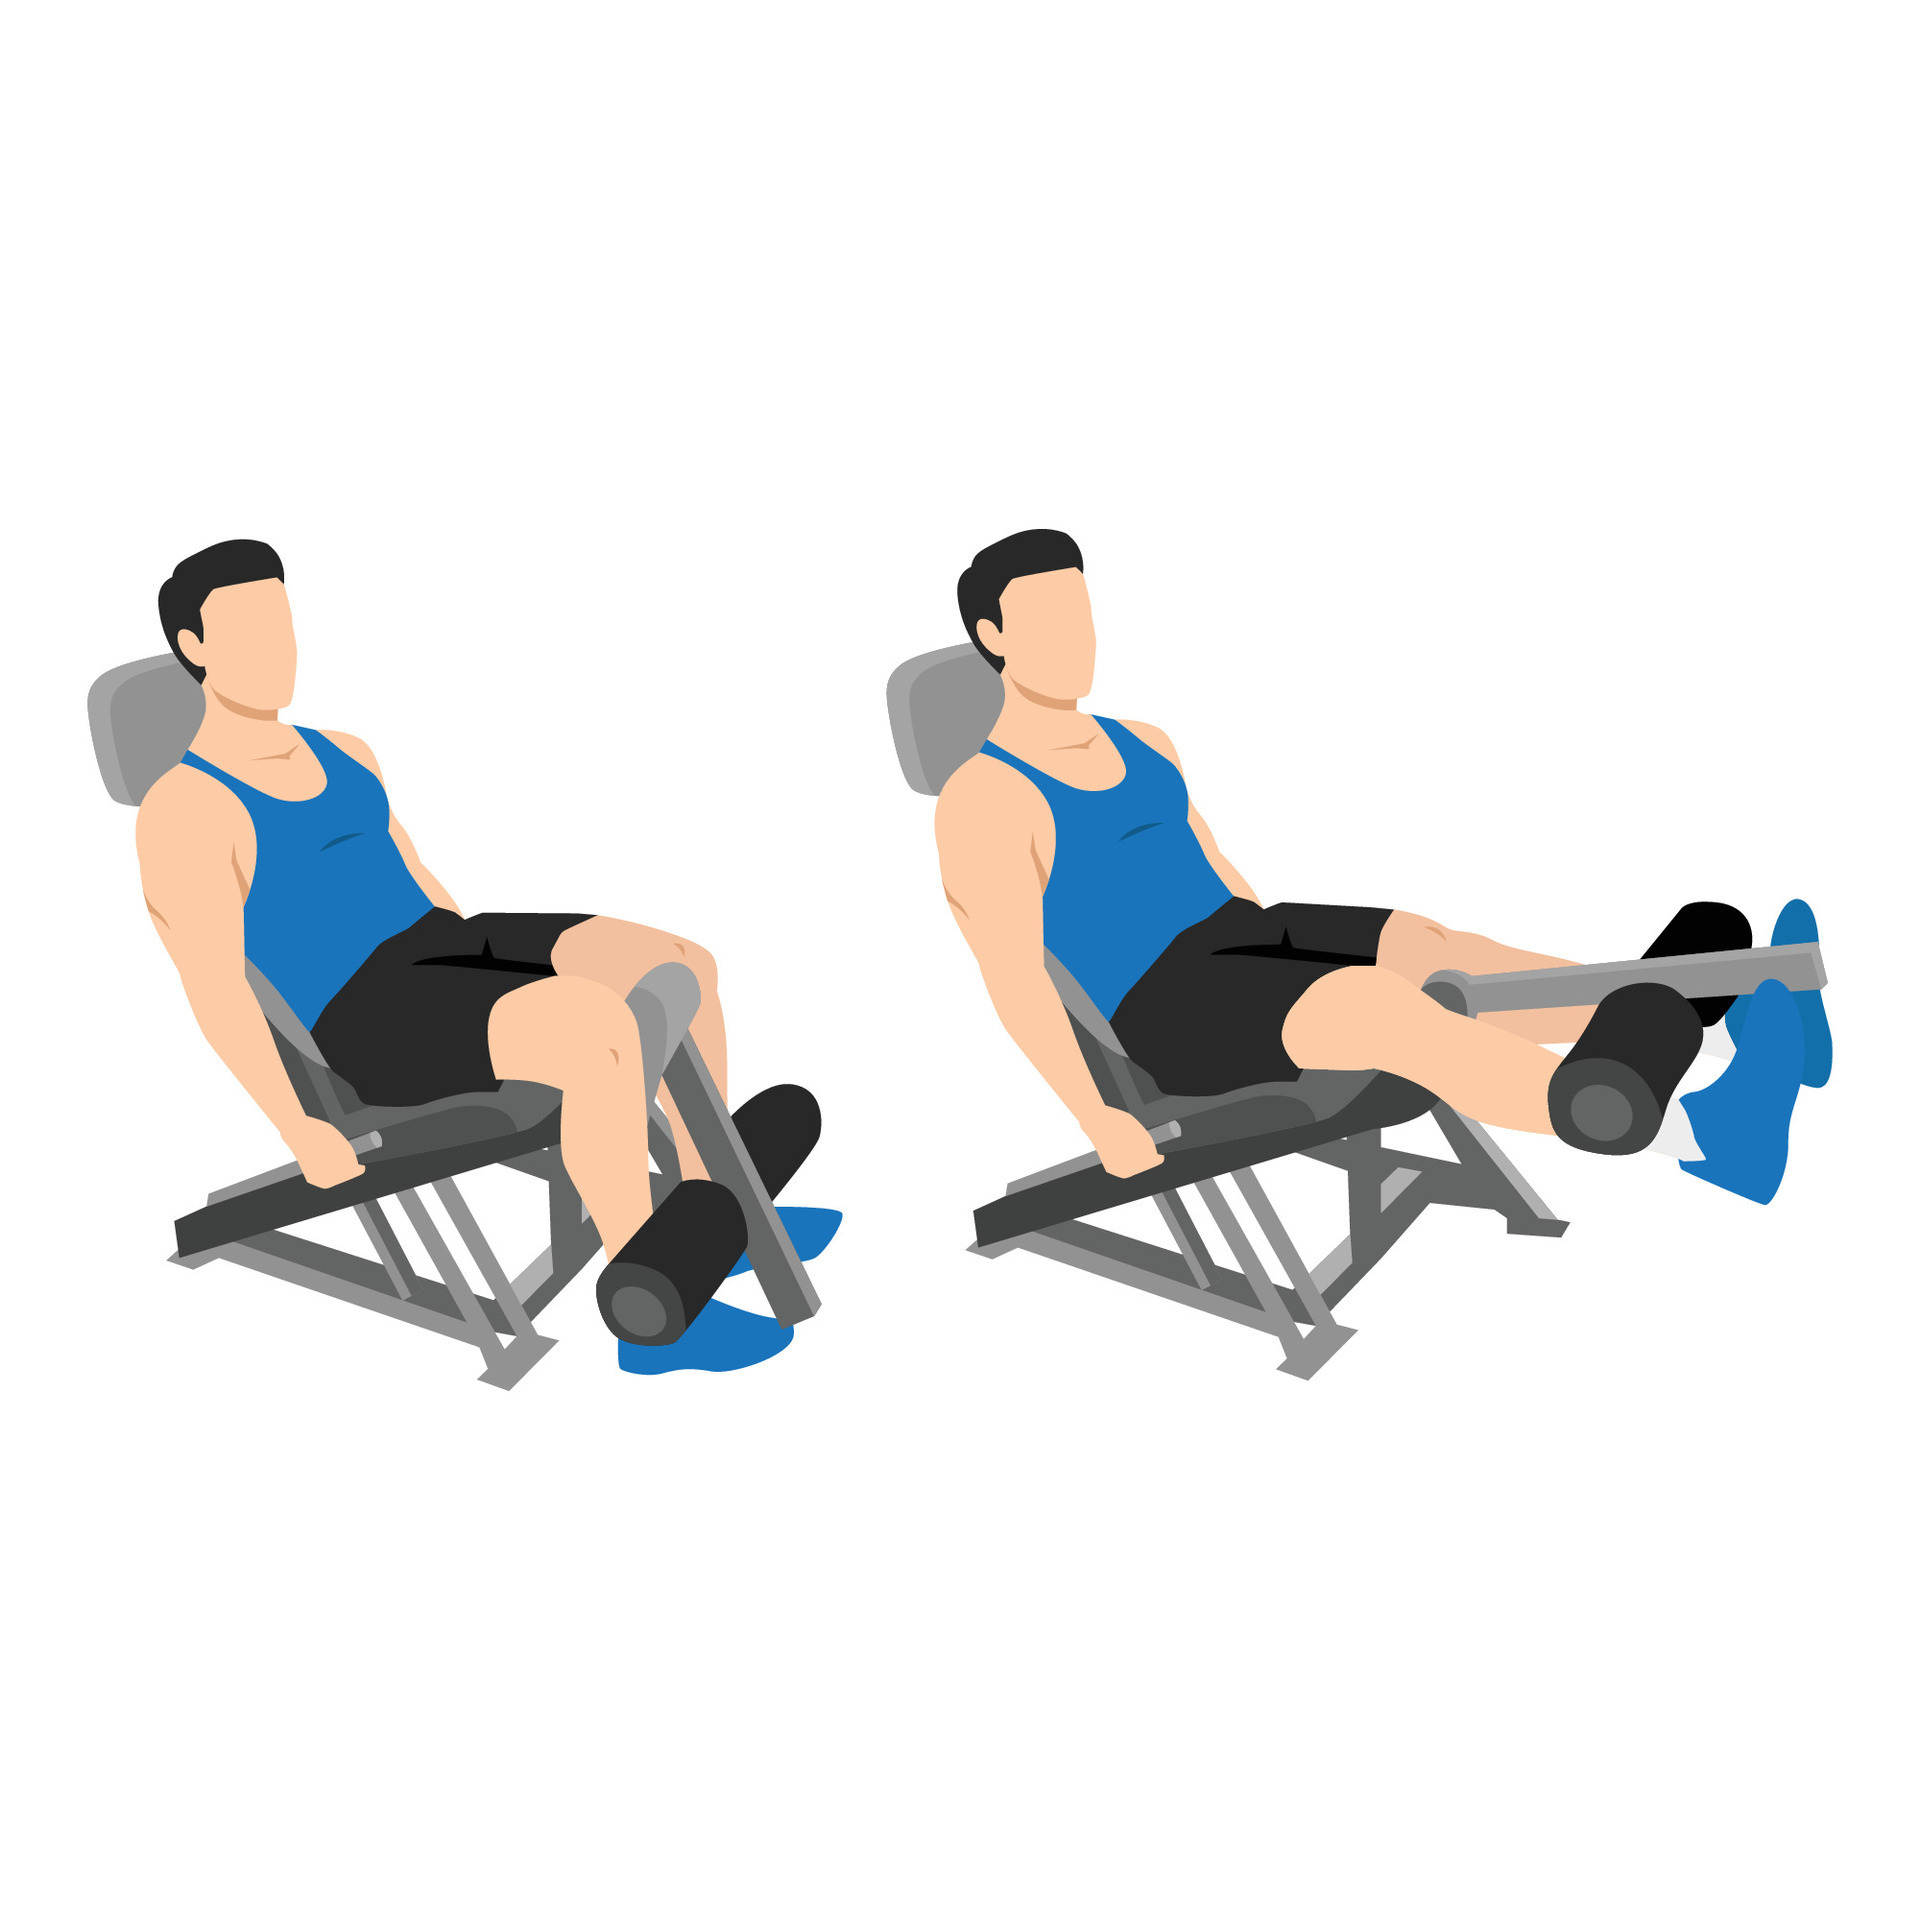 https://static.vecteezy.com/system/resources/previews/024/792/846/original/man-doing-seated-machine-leg-extensions-exercise-vector.jpg